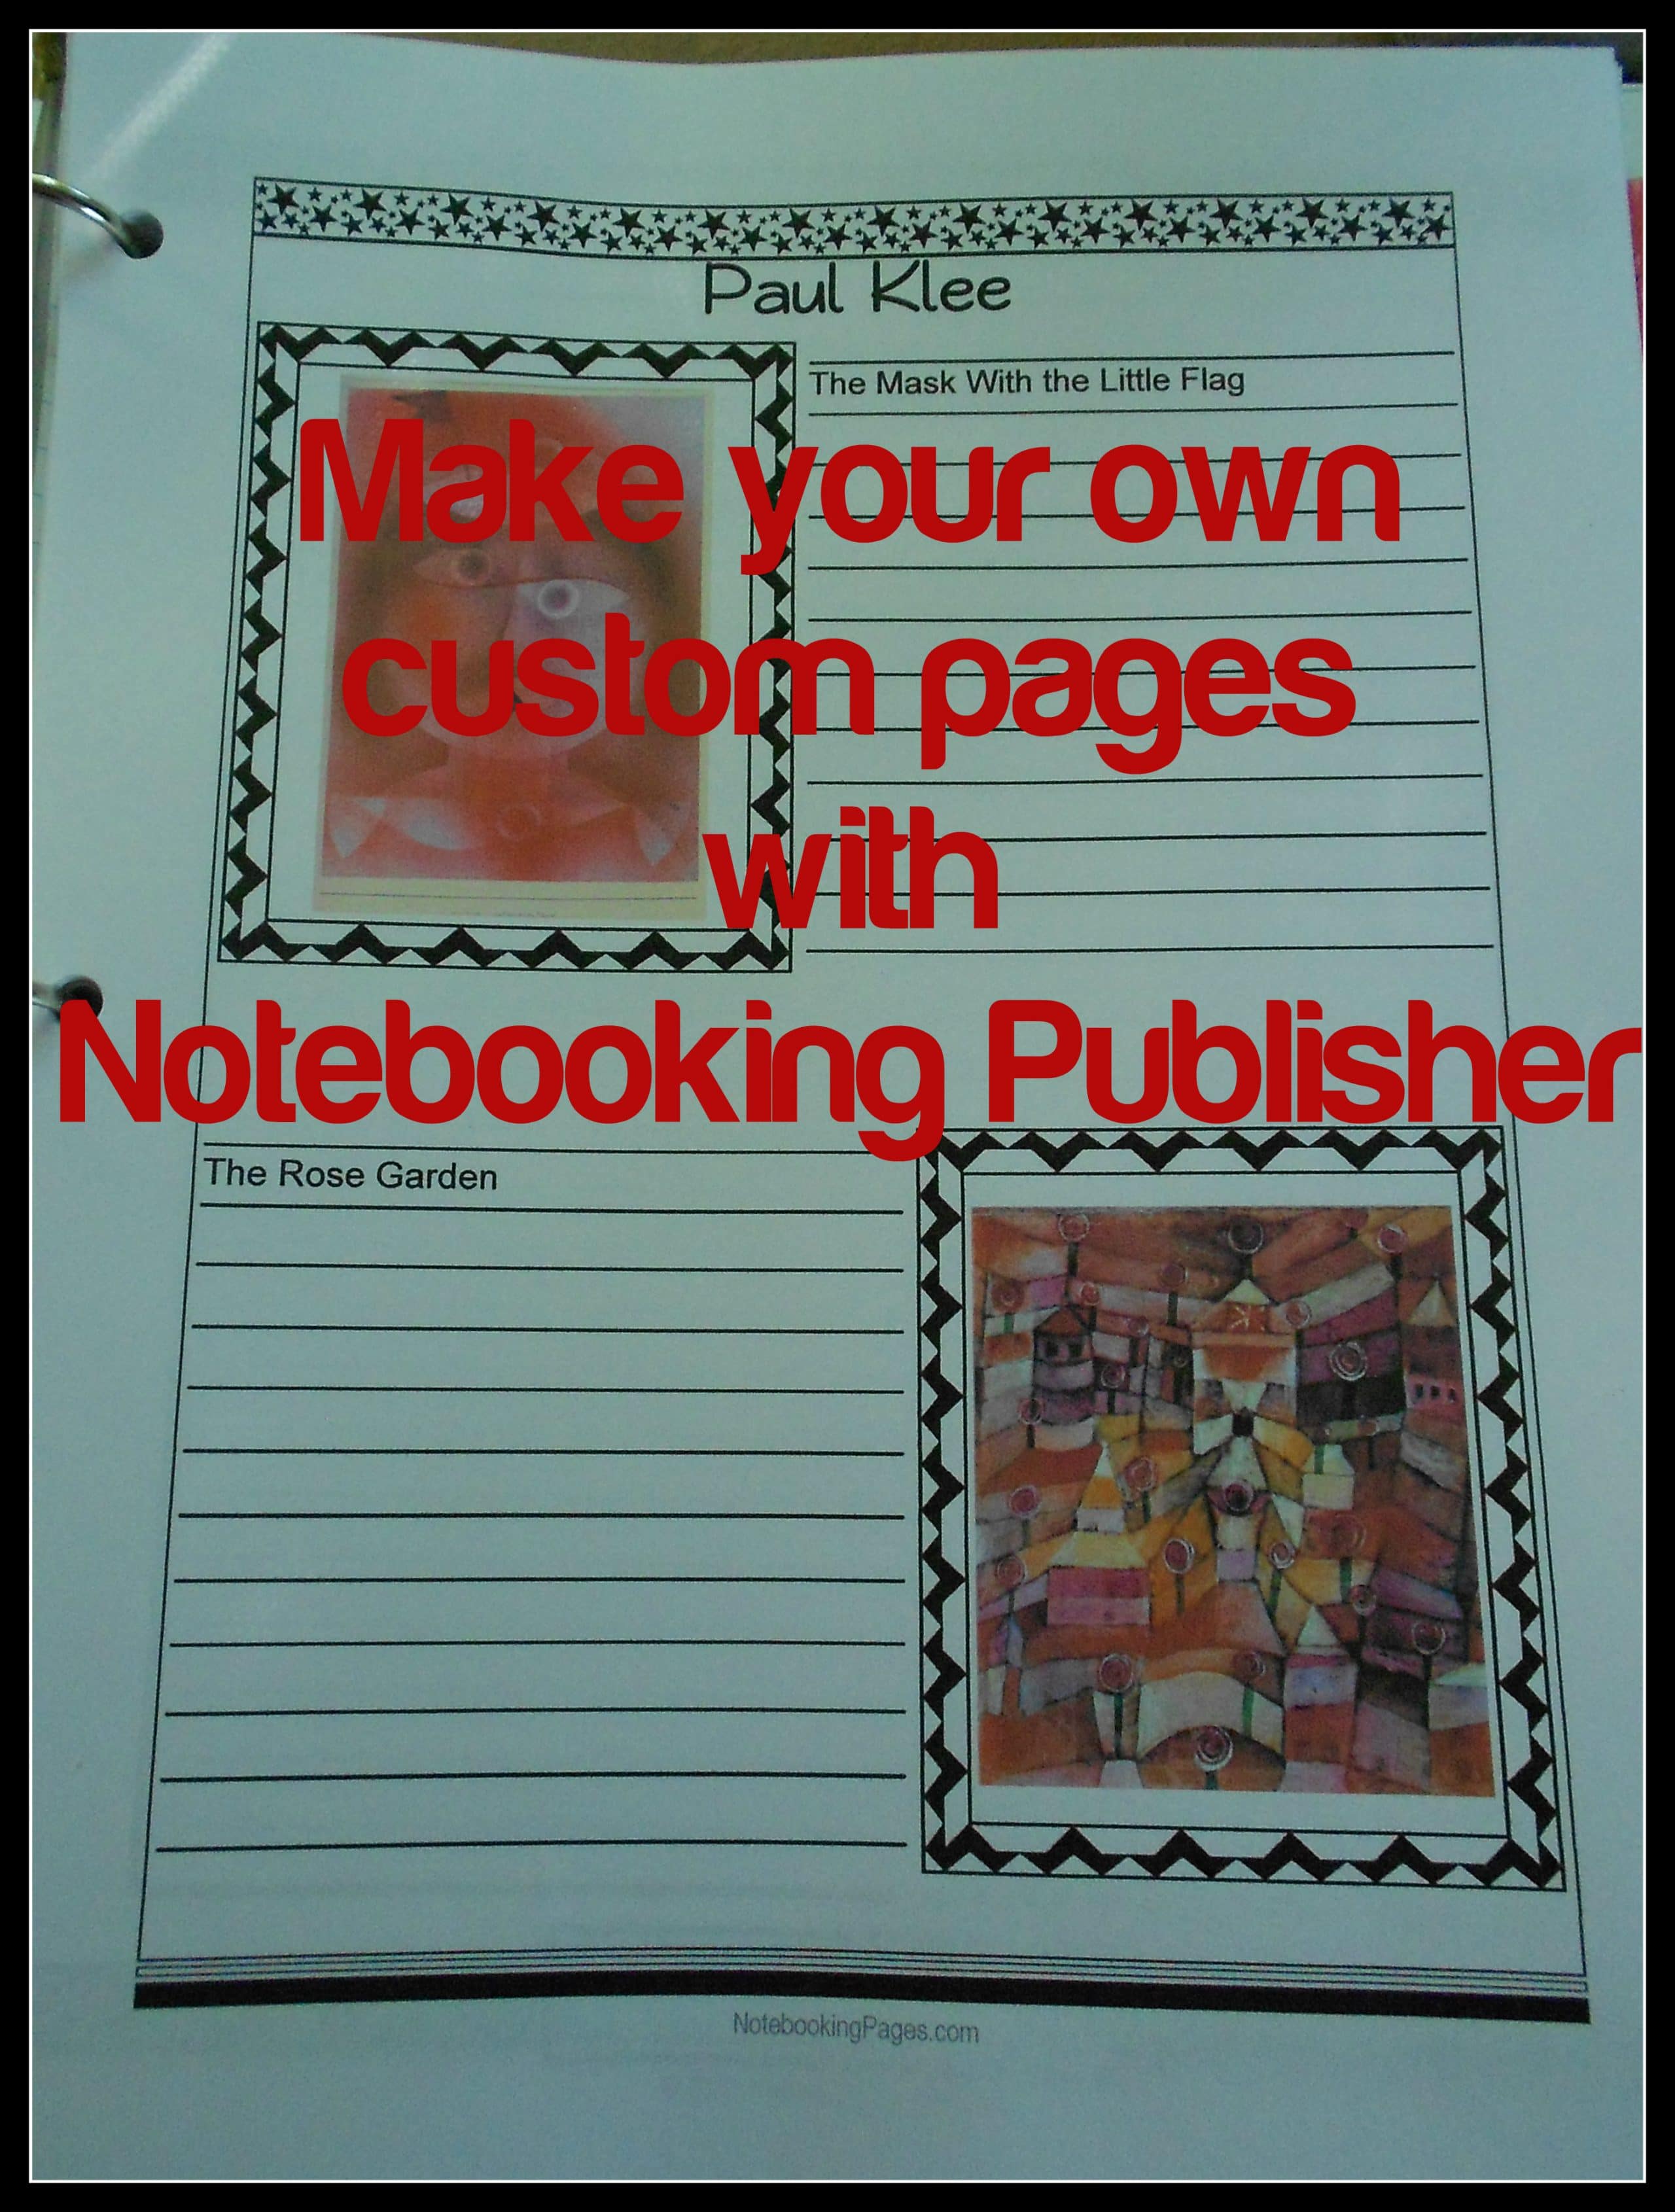 The Notebooking Publisher from NotebookingPages.com